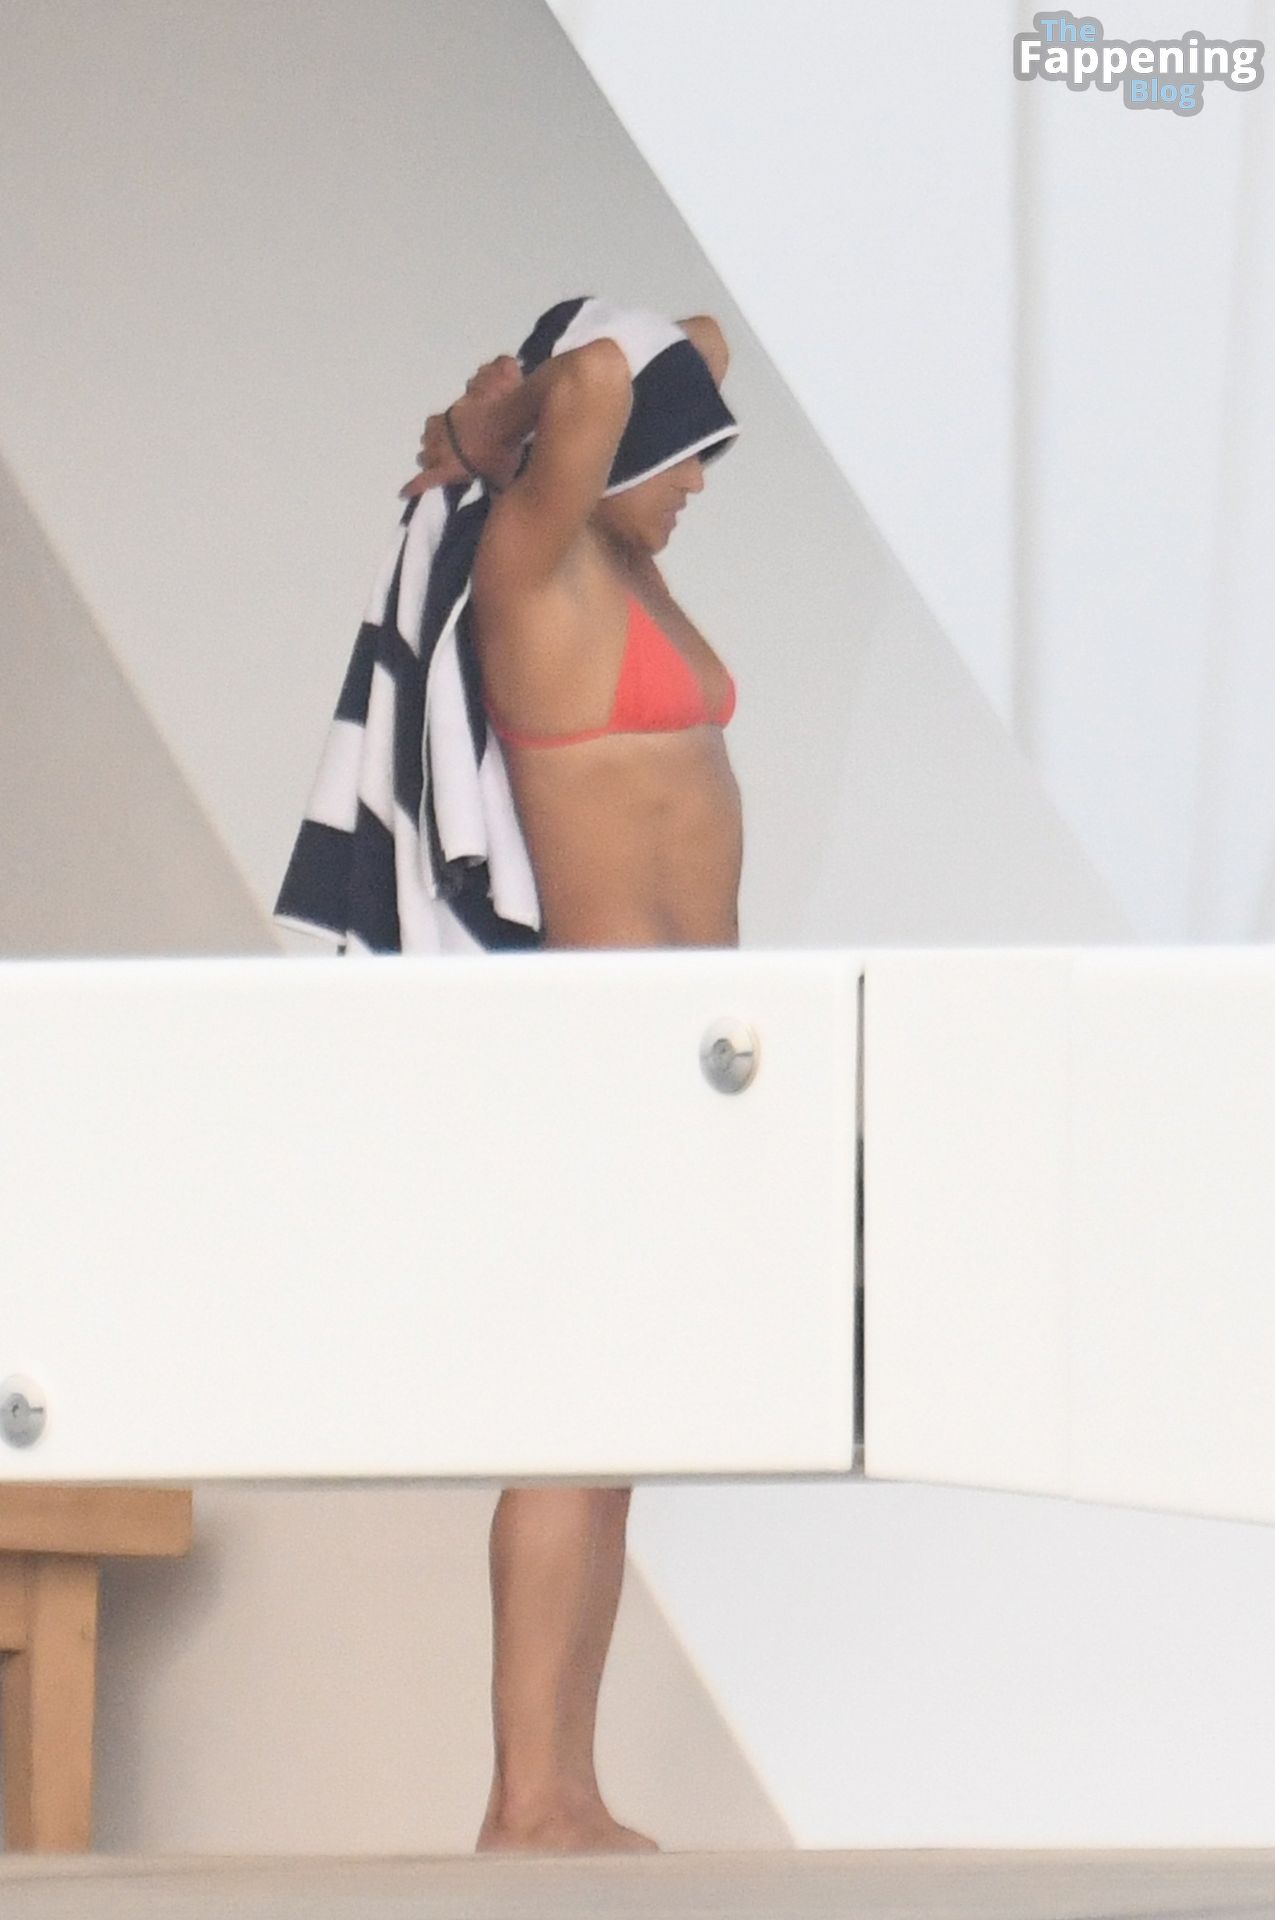 Michelle Rodriguez Flashes Her Bare Butt as She Enjoys a Playful Day on the Boat (142 Photos)